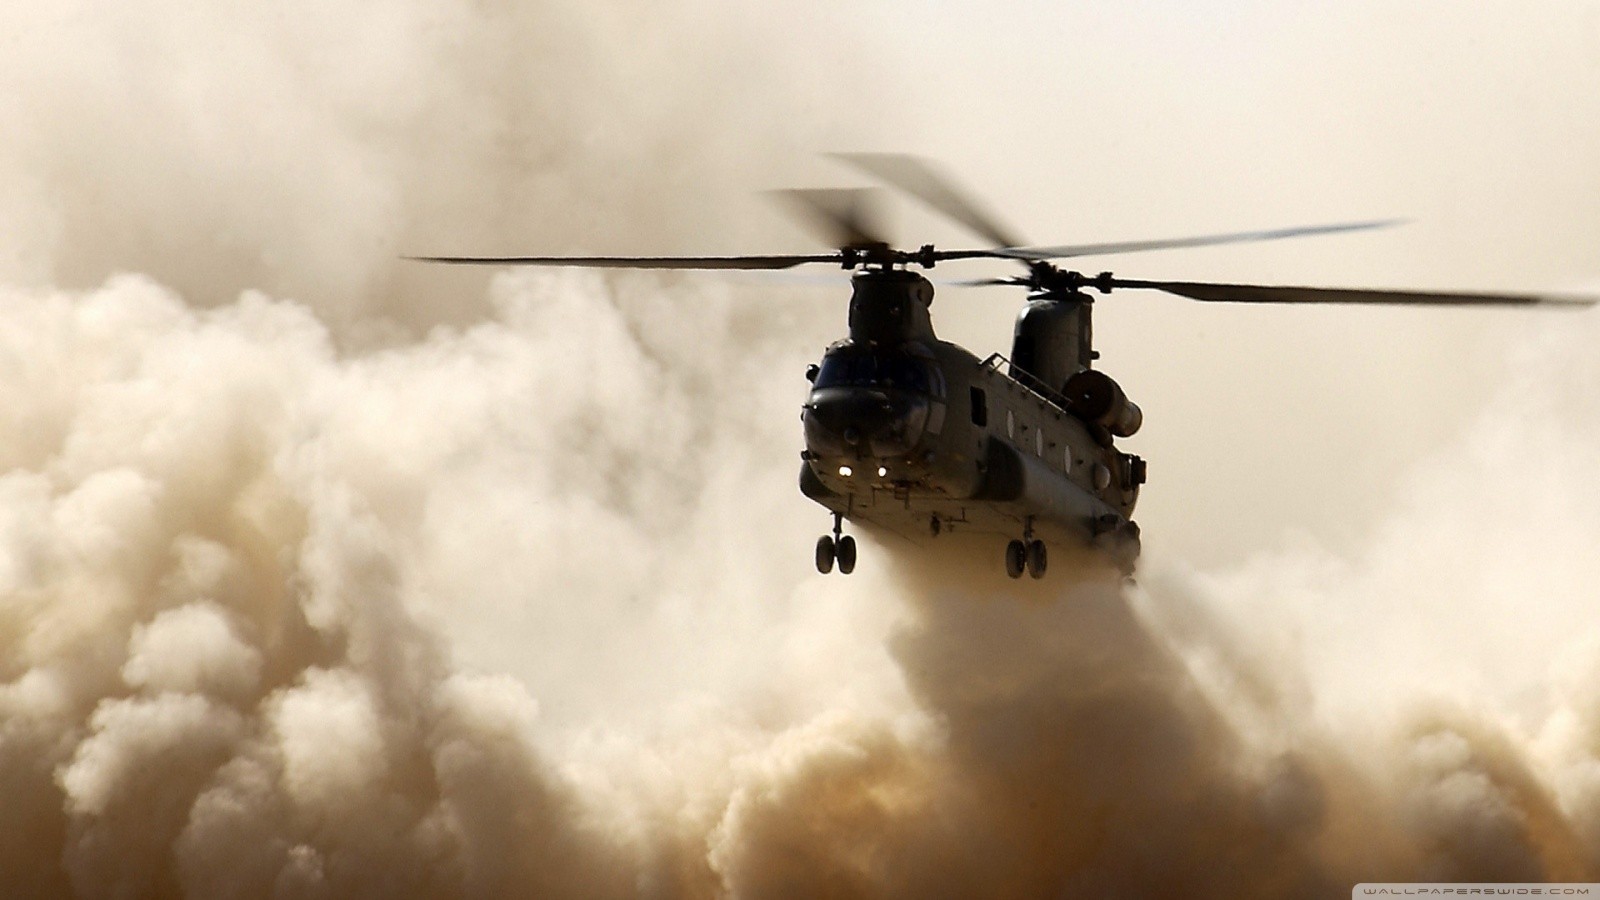 General 1600x900 military aircraft Boeing CH-47 Chinook helicopters dust beige flying military vehicle military vehicle clouds Dust cloud watermarked